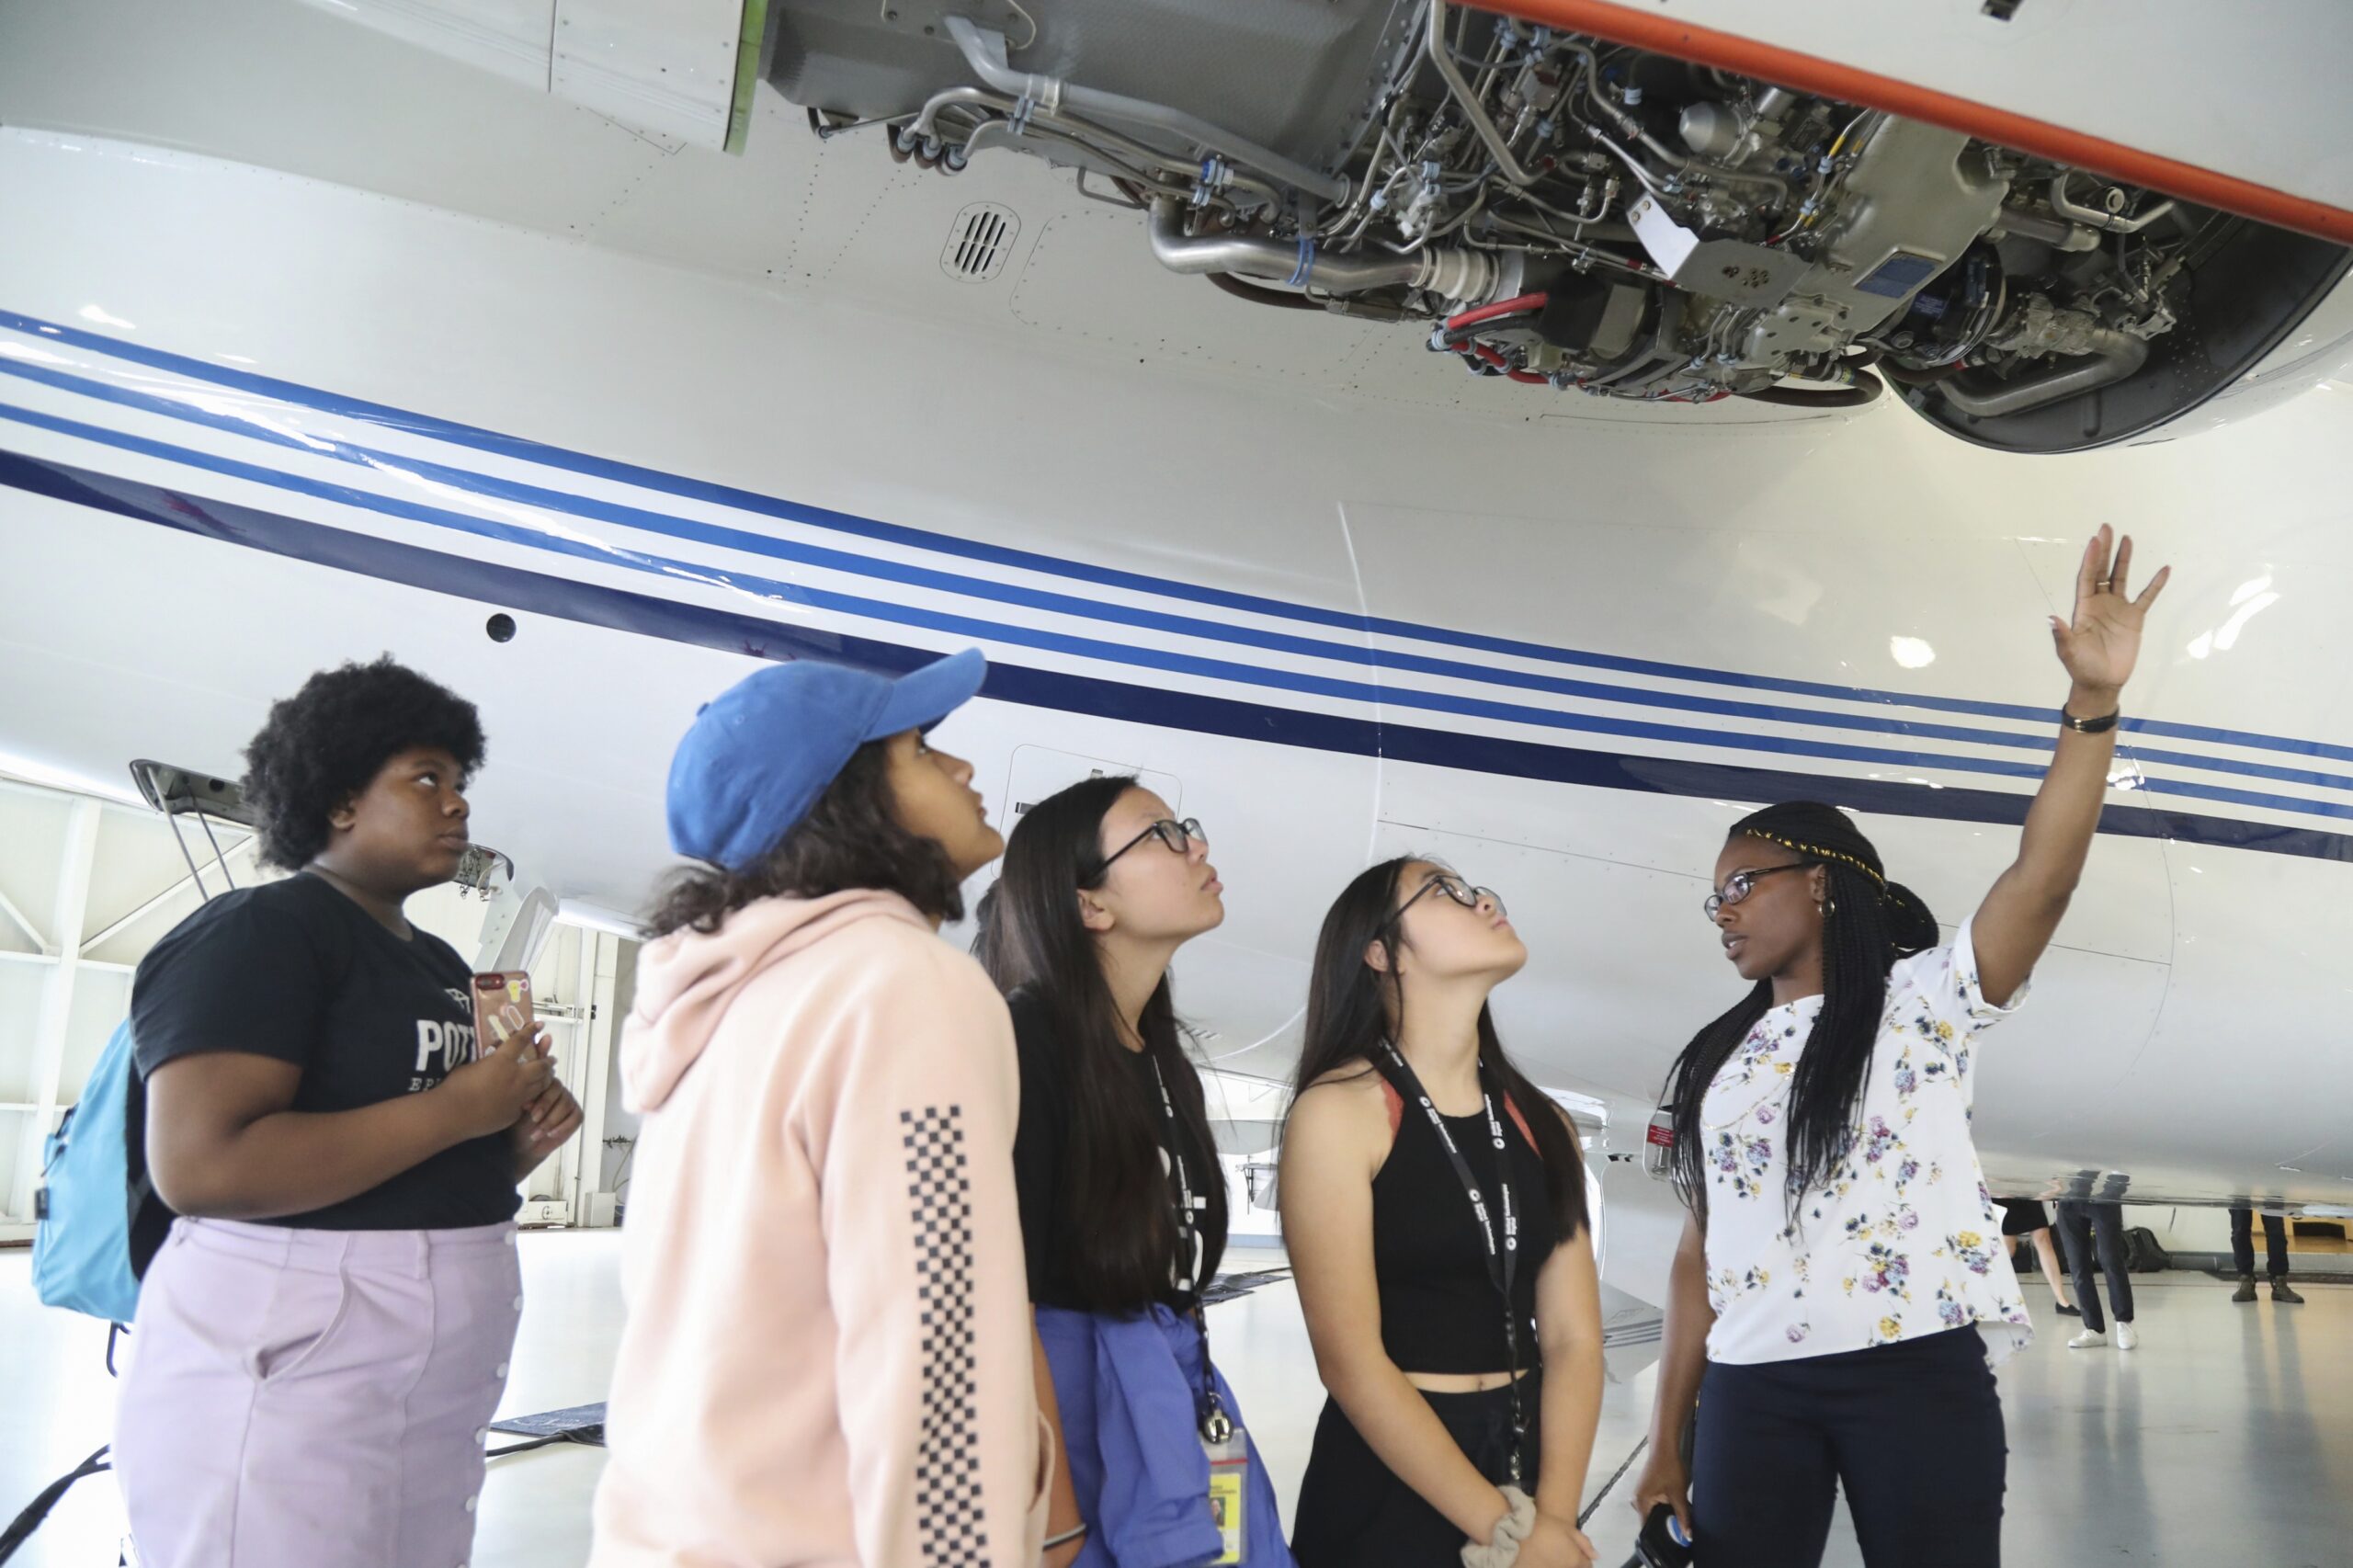 Girls looking at an airplane engine